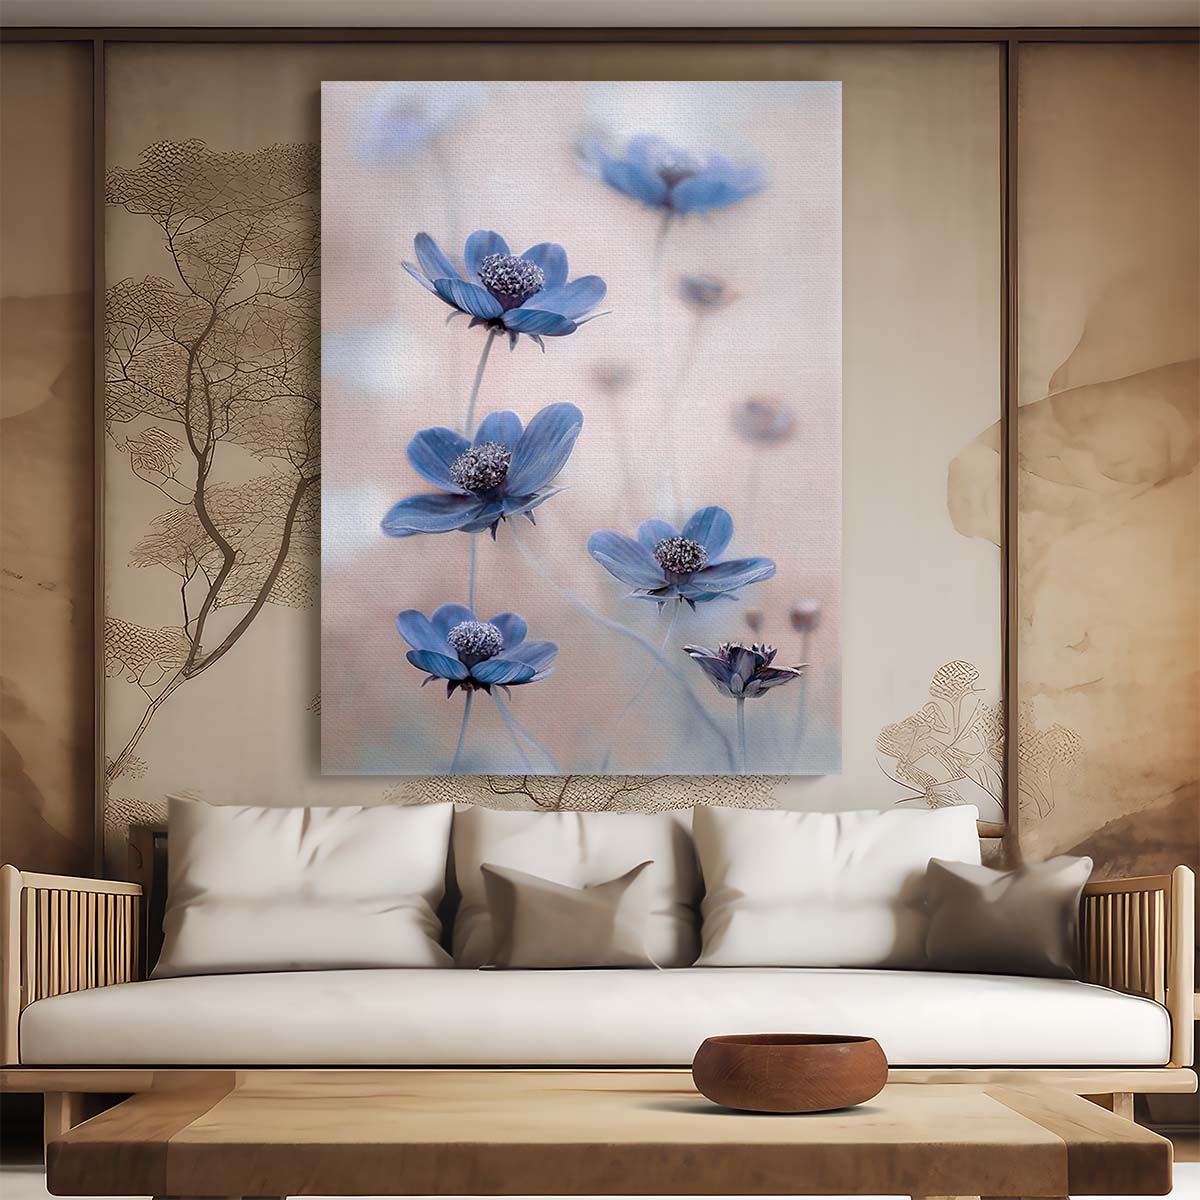 Blue Cosmos Flower Macro Photography Art - Pastel Spring Floral by Luxuriance Designs, made in USA